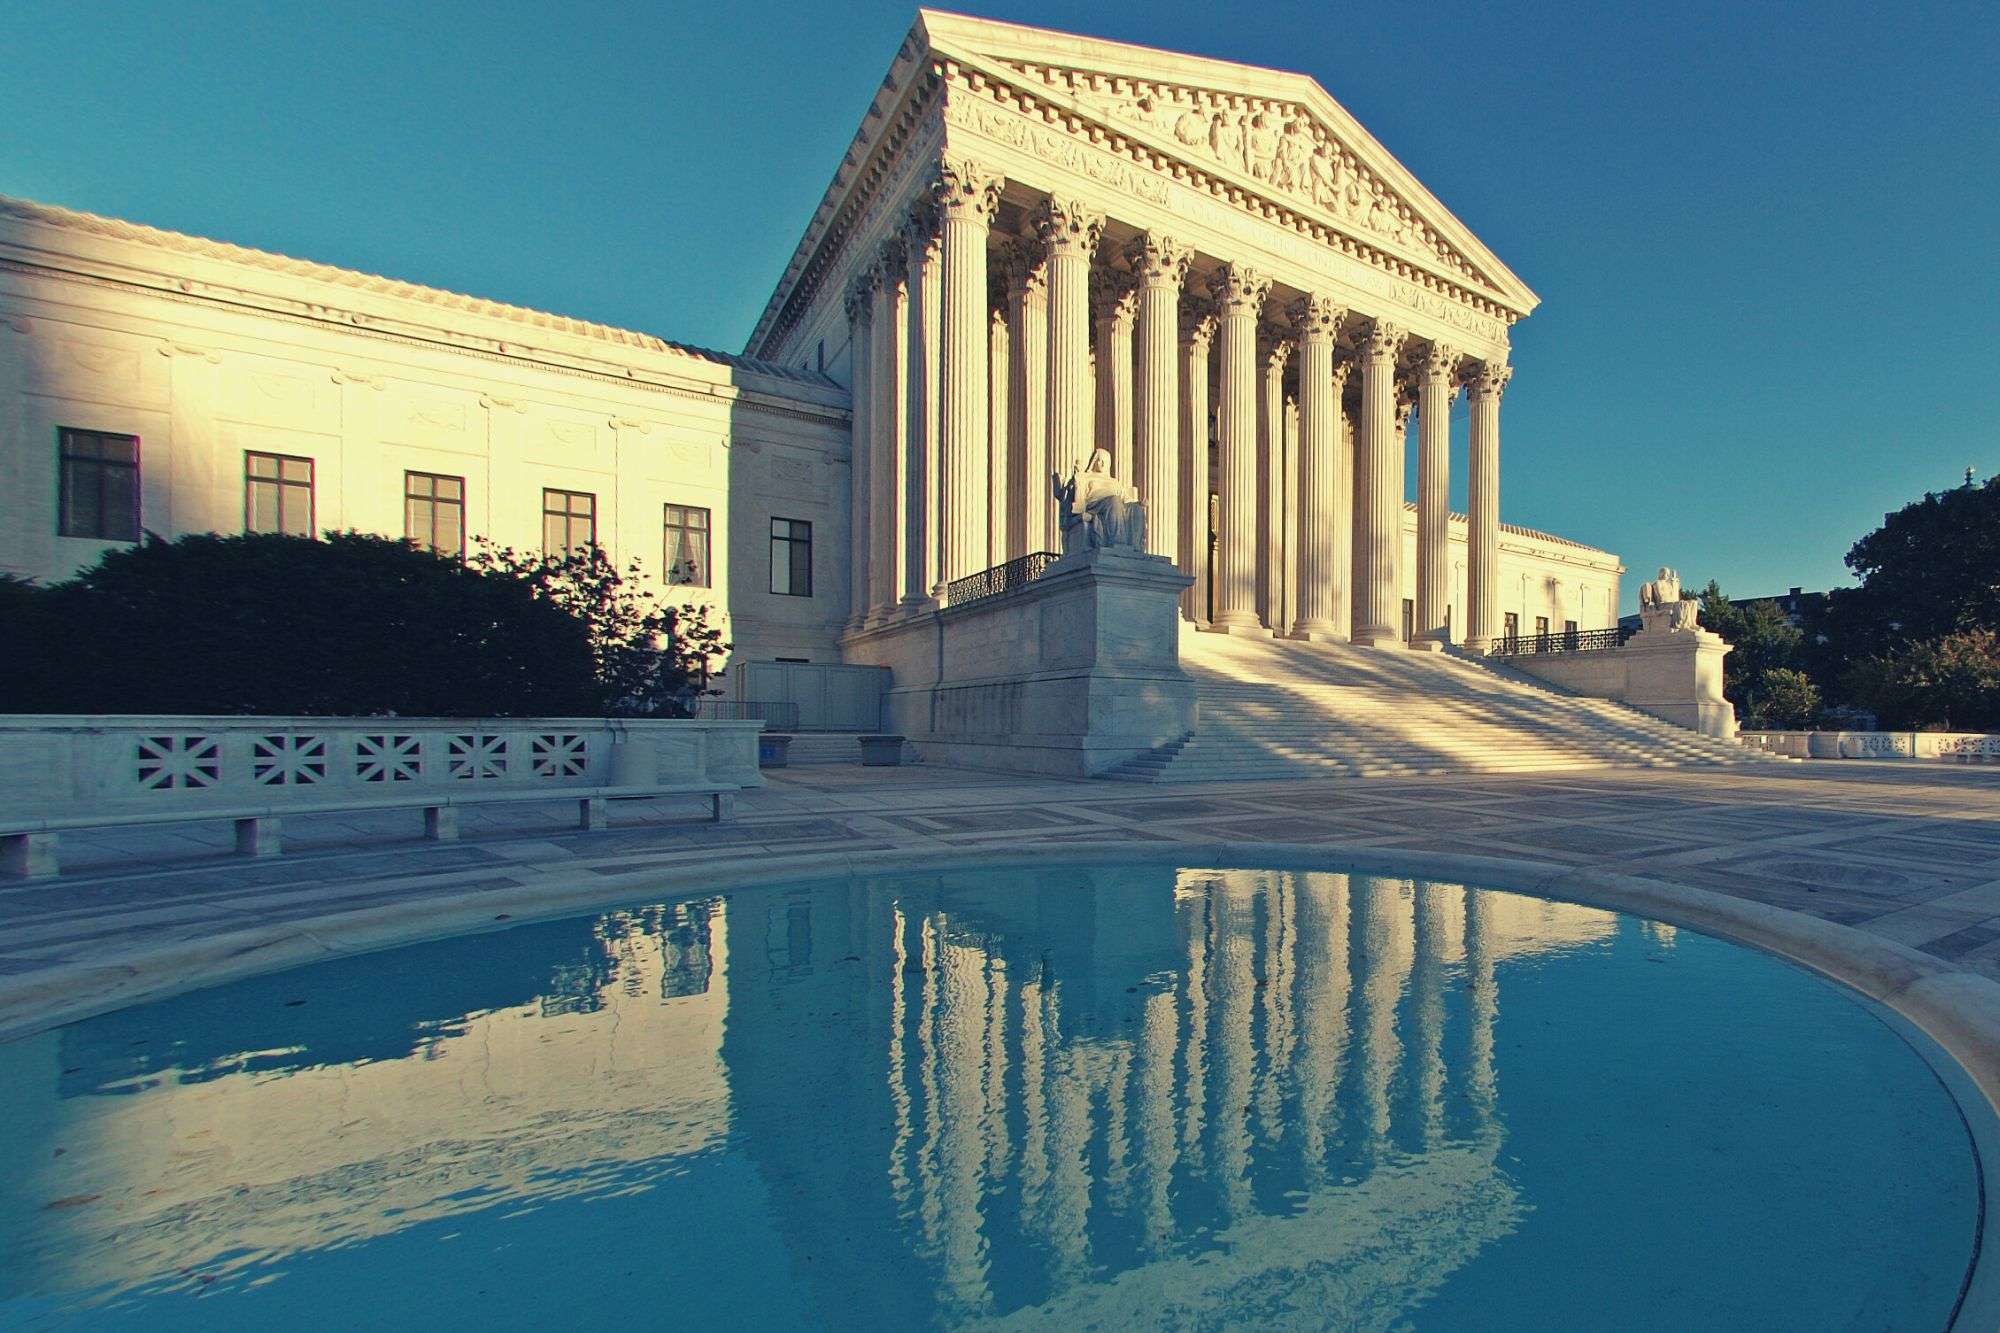 Image of supreme court being reflected in a pool of wahter